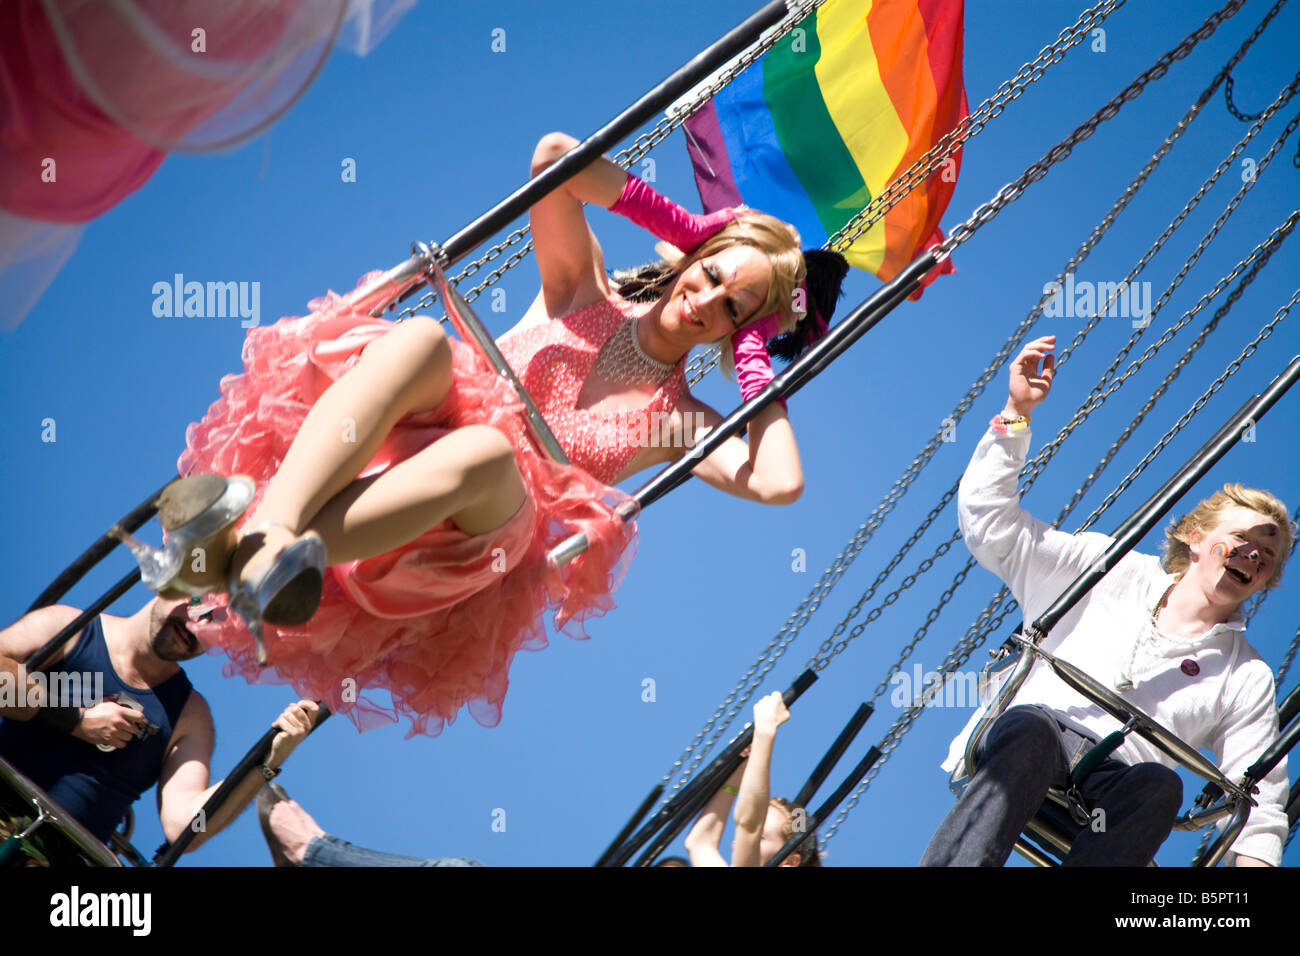 A transvestite holds on to his/her wig as she rides on the carousel at Brighton's Gay Pride fun fair. Stock Photo